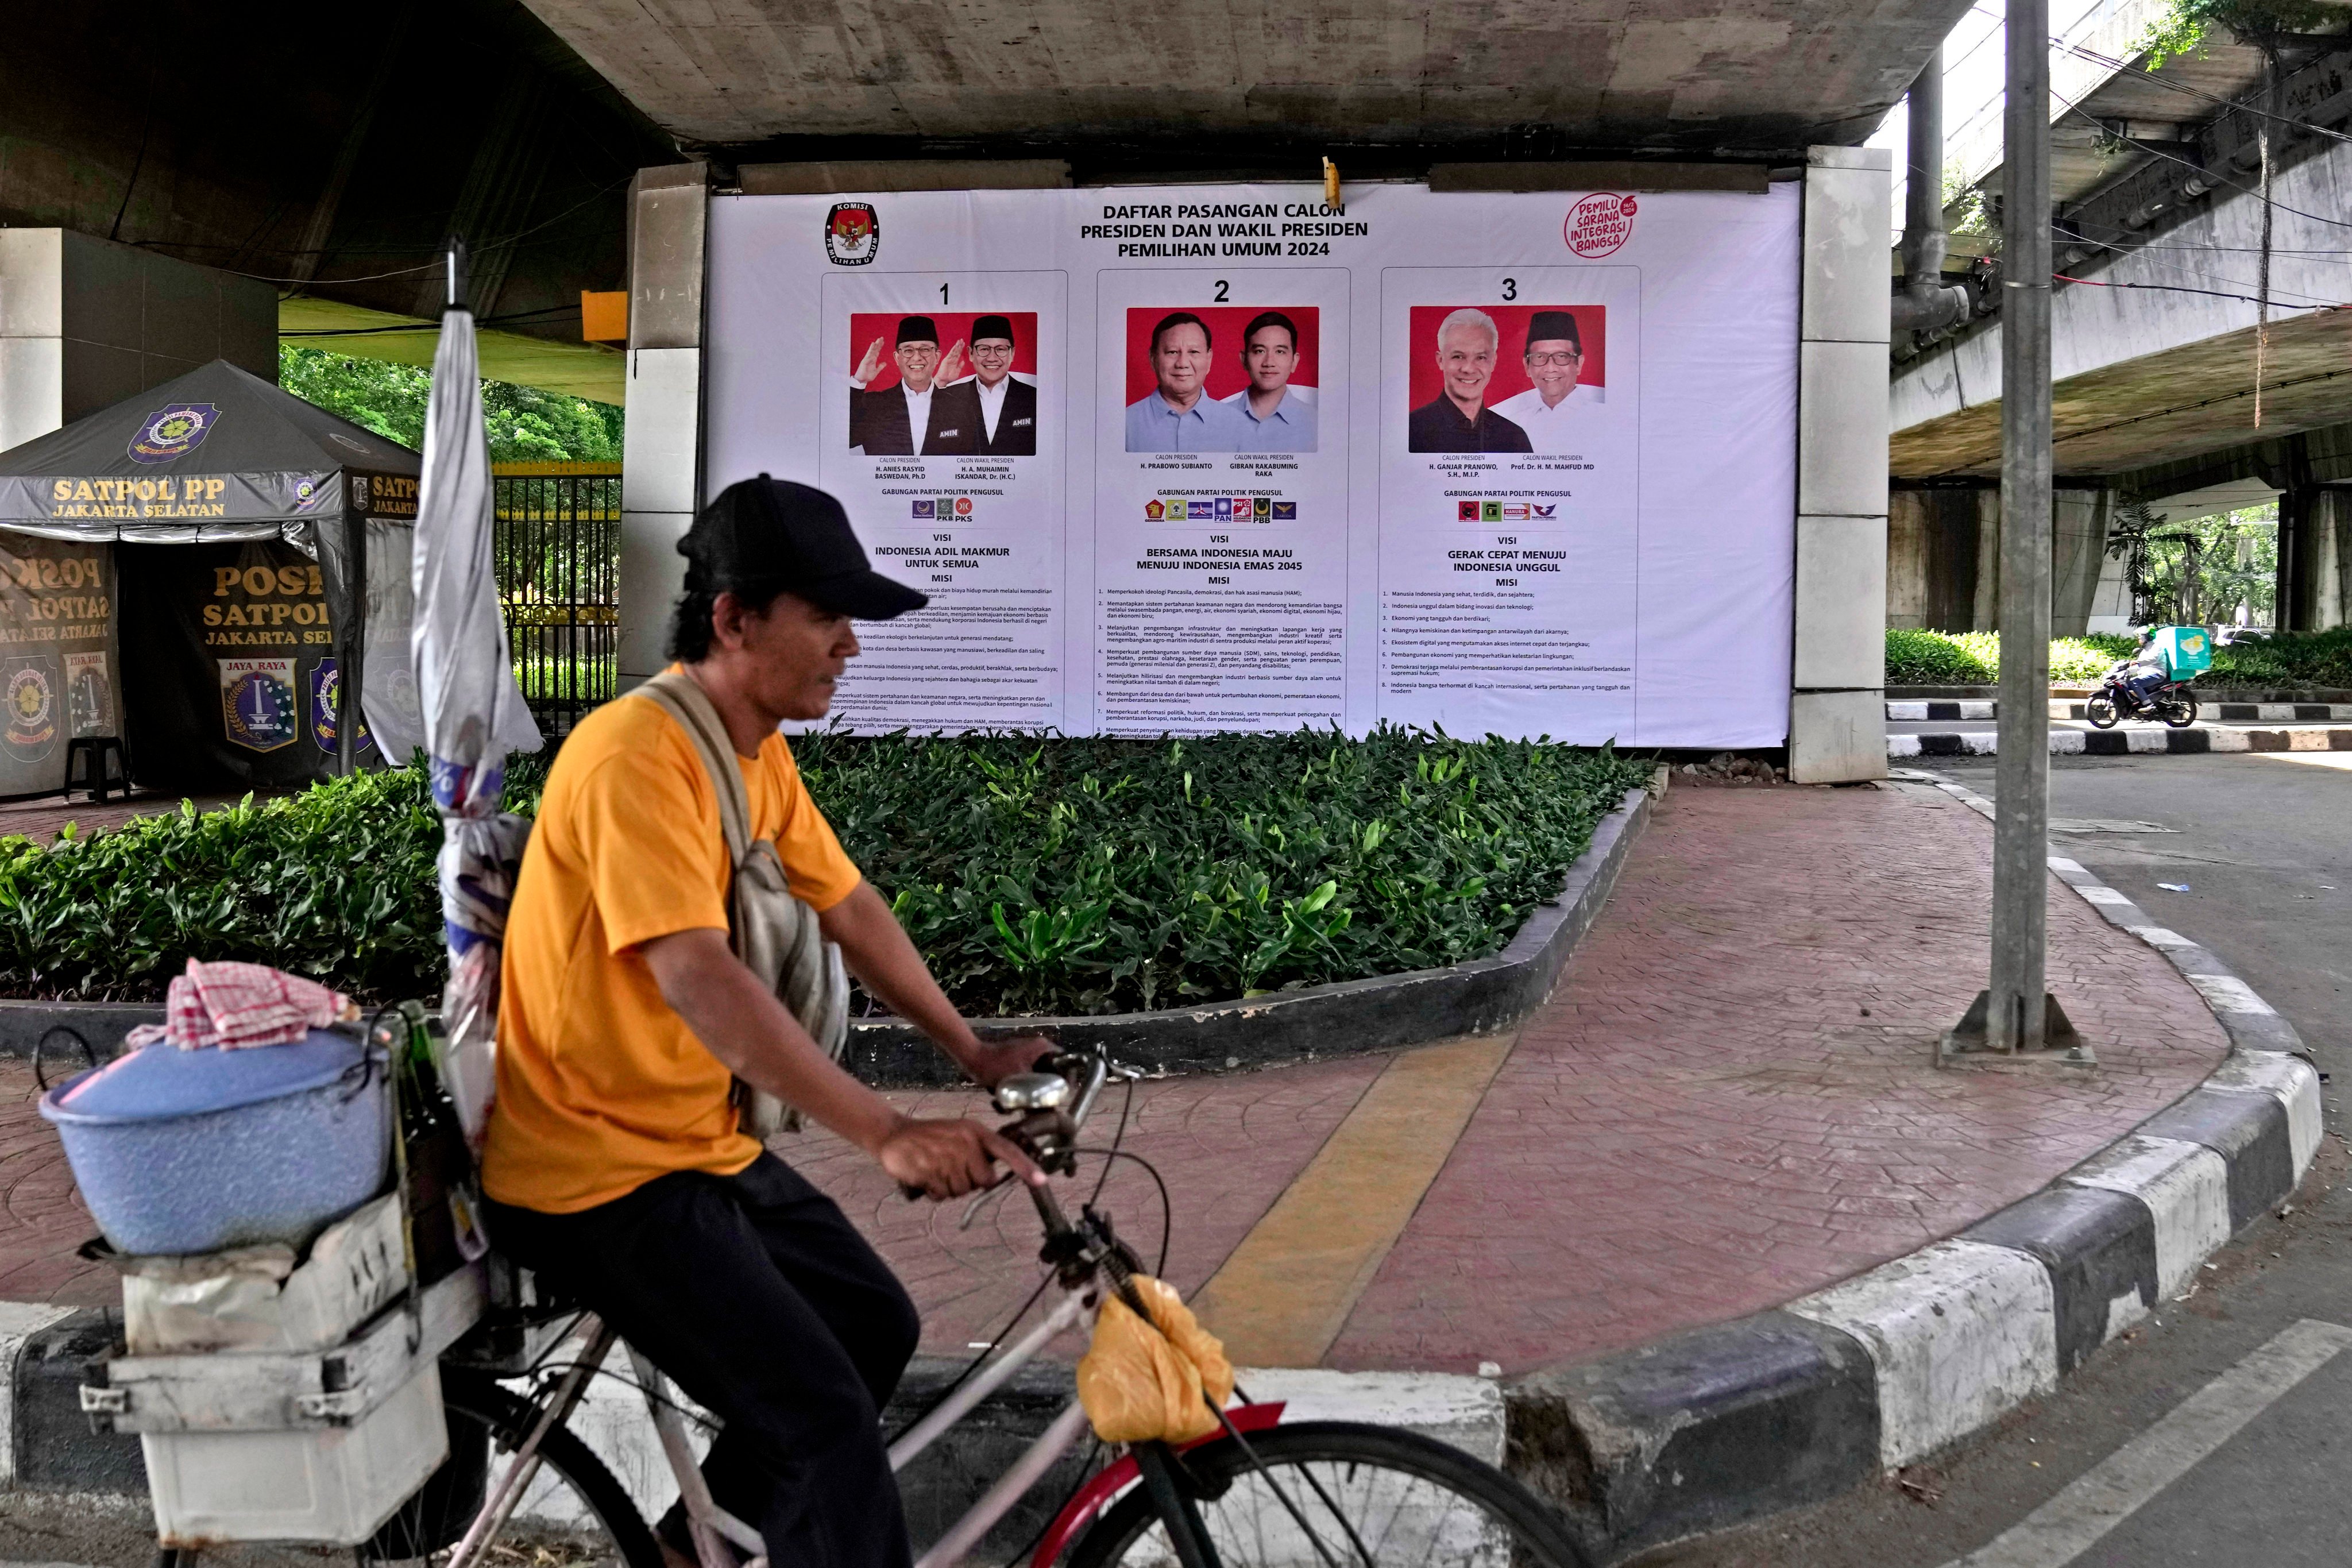 A food vendor rides his bicycle past a General Election Commission’s banner showing the photos of presidential candidates in Jakarta. Photo: AP